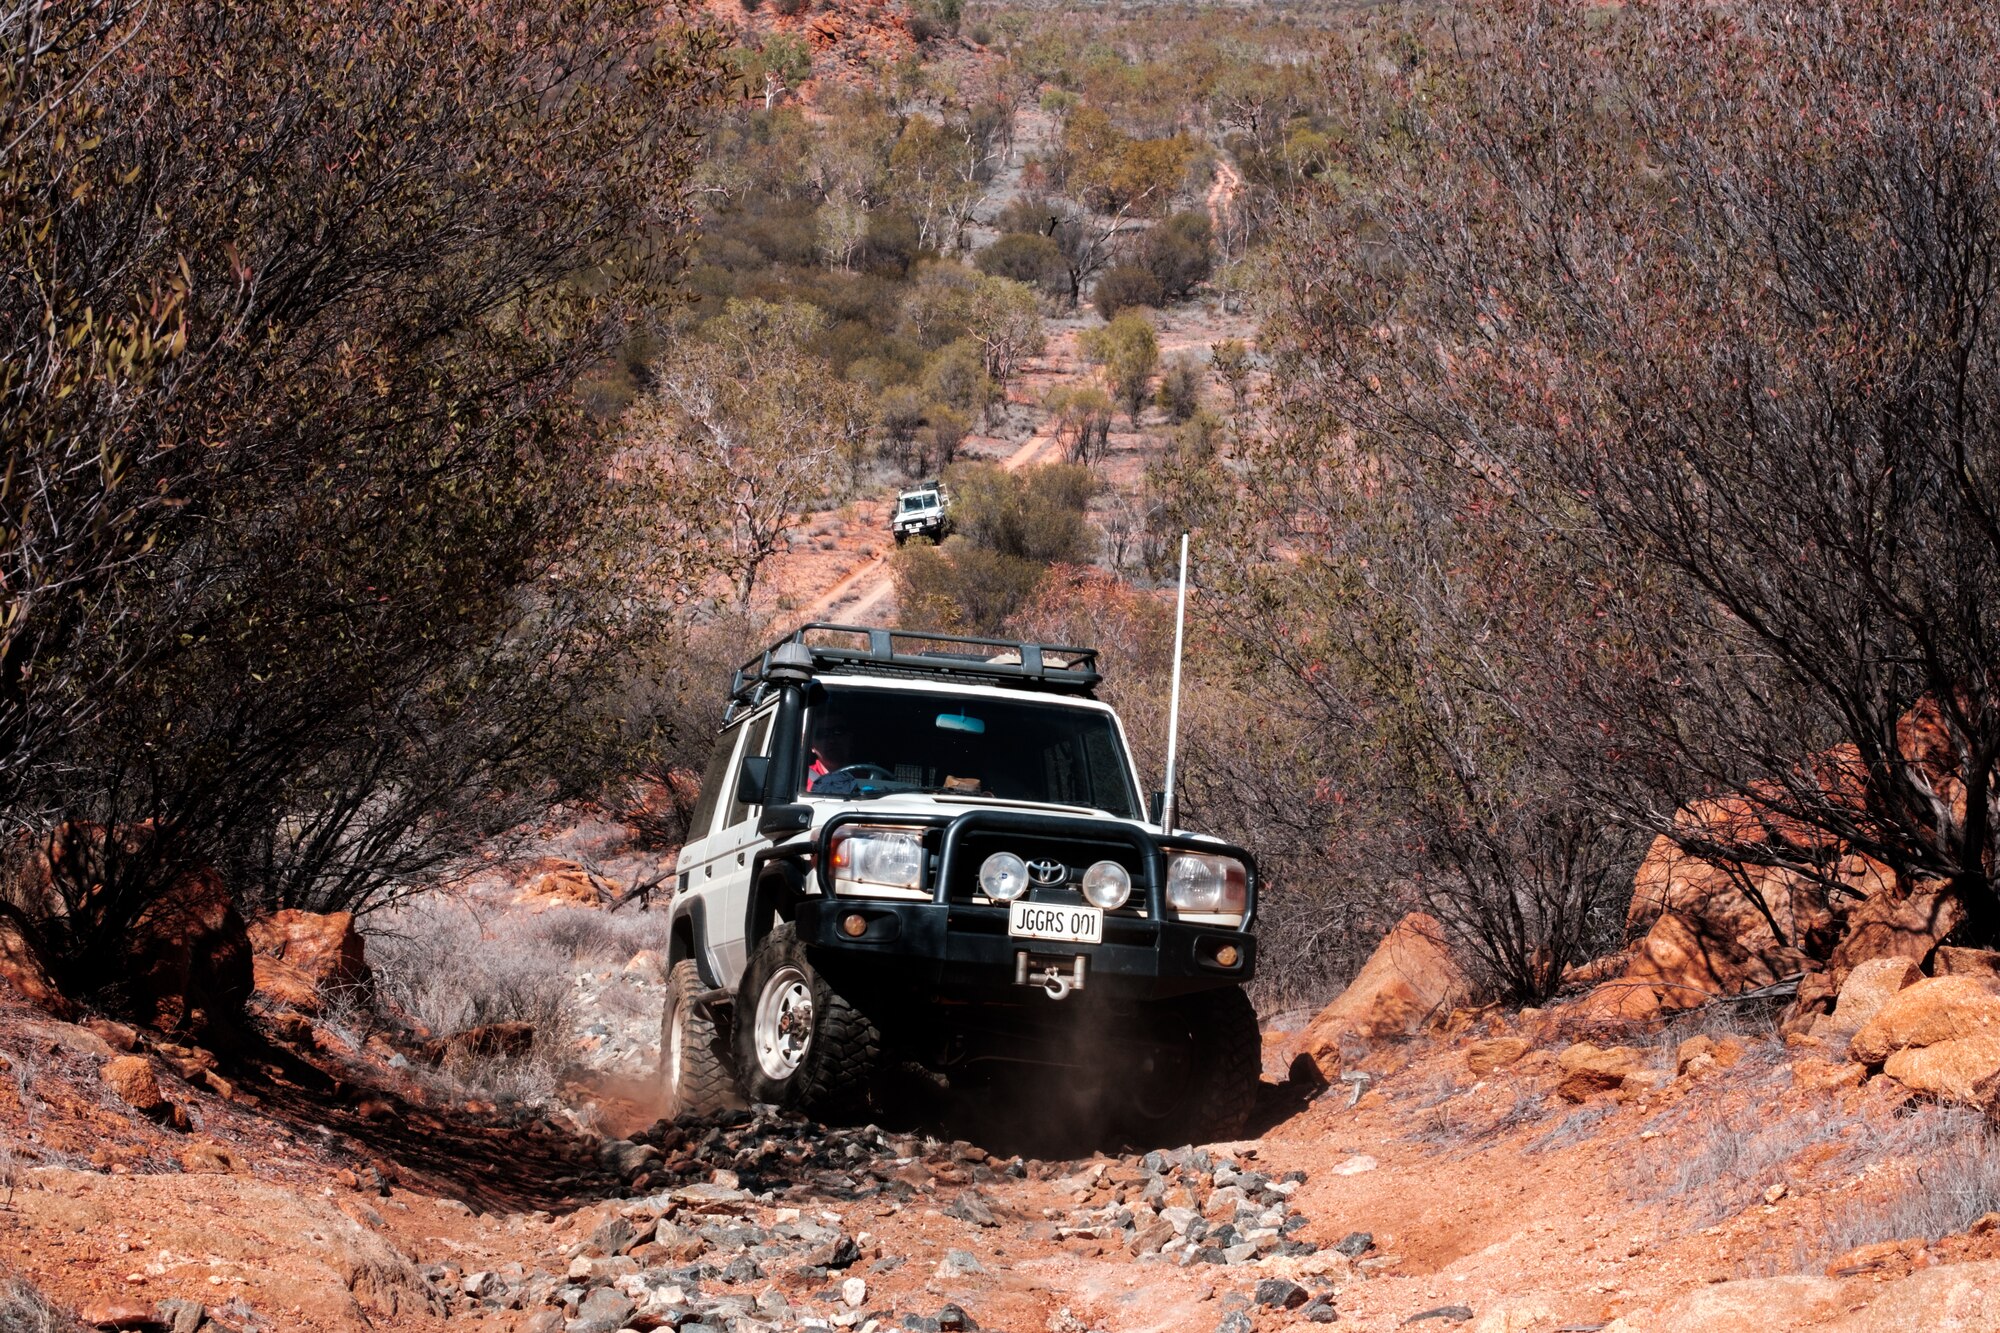 Airmen assigned to the 709th Technical Maintenance Squadron, Detachment 421, drive to a maintenance site in the outback of Alice Springs, Australia, Aug. 28, 2019. The Airmen receive special driving training once assigned to deal with the rough terrain and road hazards, which include kangaroos and free-roaming camels. (U.S. Air Force photo illustration by Master Sgt. Benjamin Wilson)